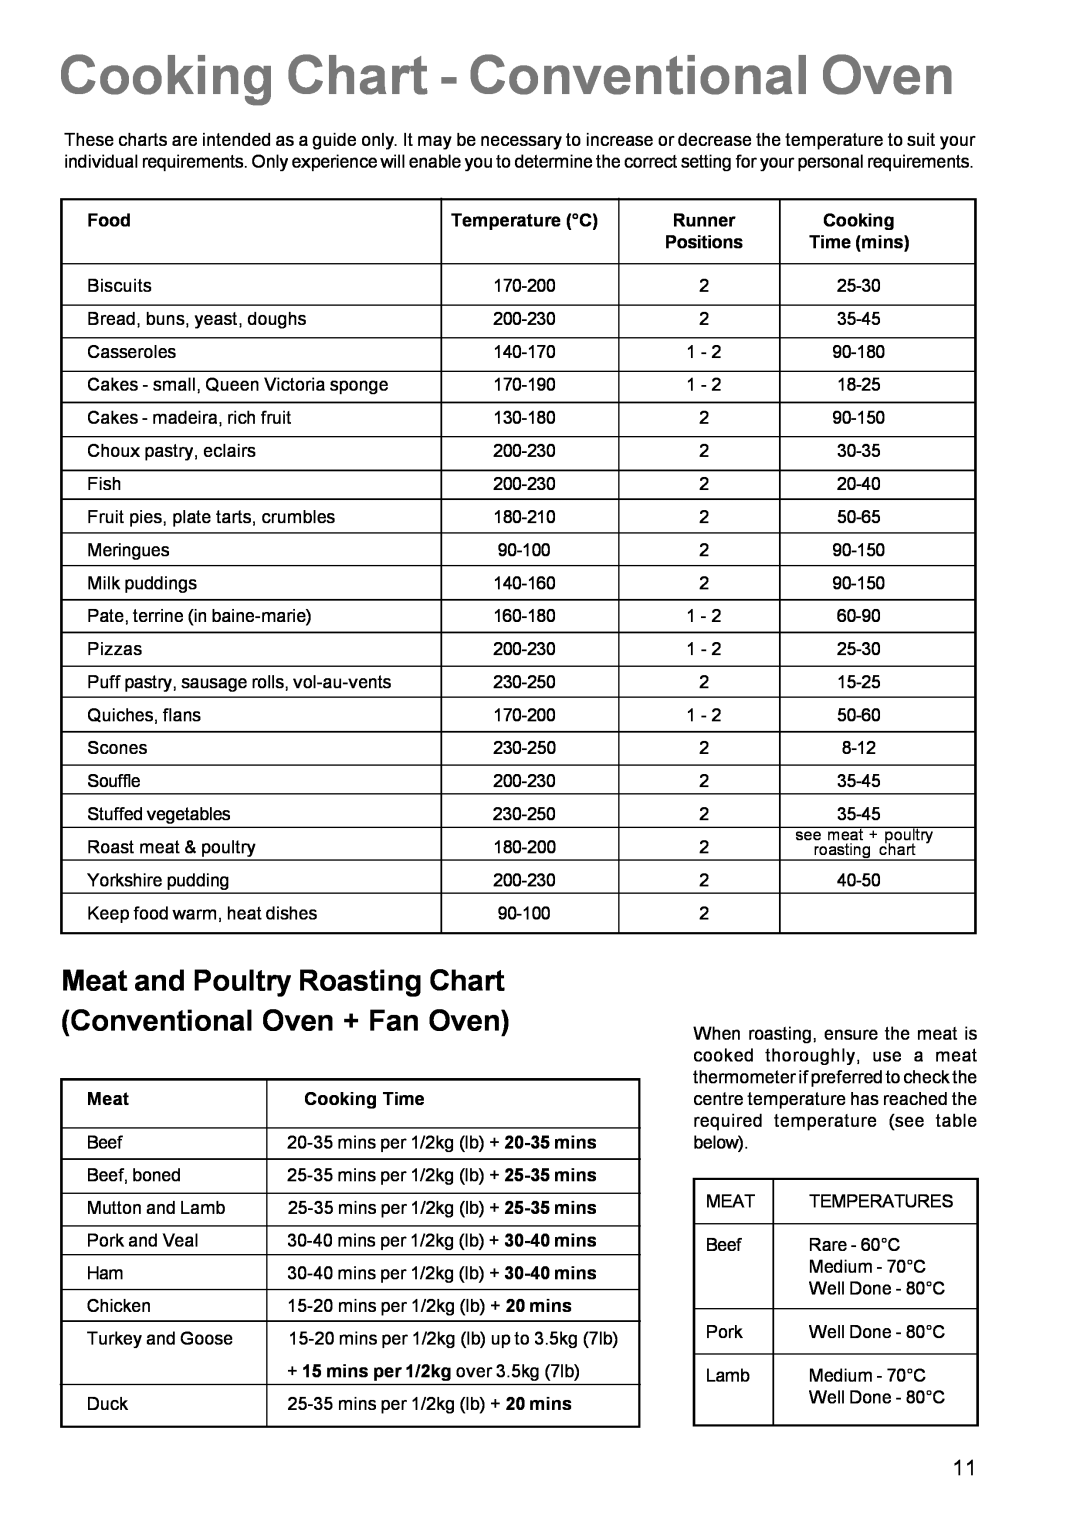 Zanussi ZCM 631 manual Cooking Chart - Conventional Oven, Meat and Poultry Roasting Chart Conventional Oven + Fan Oven 